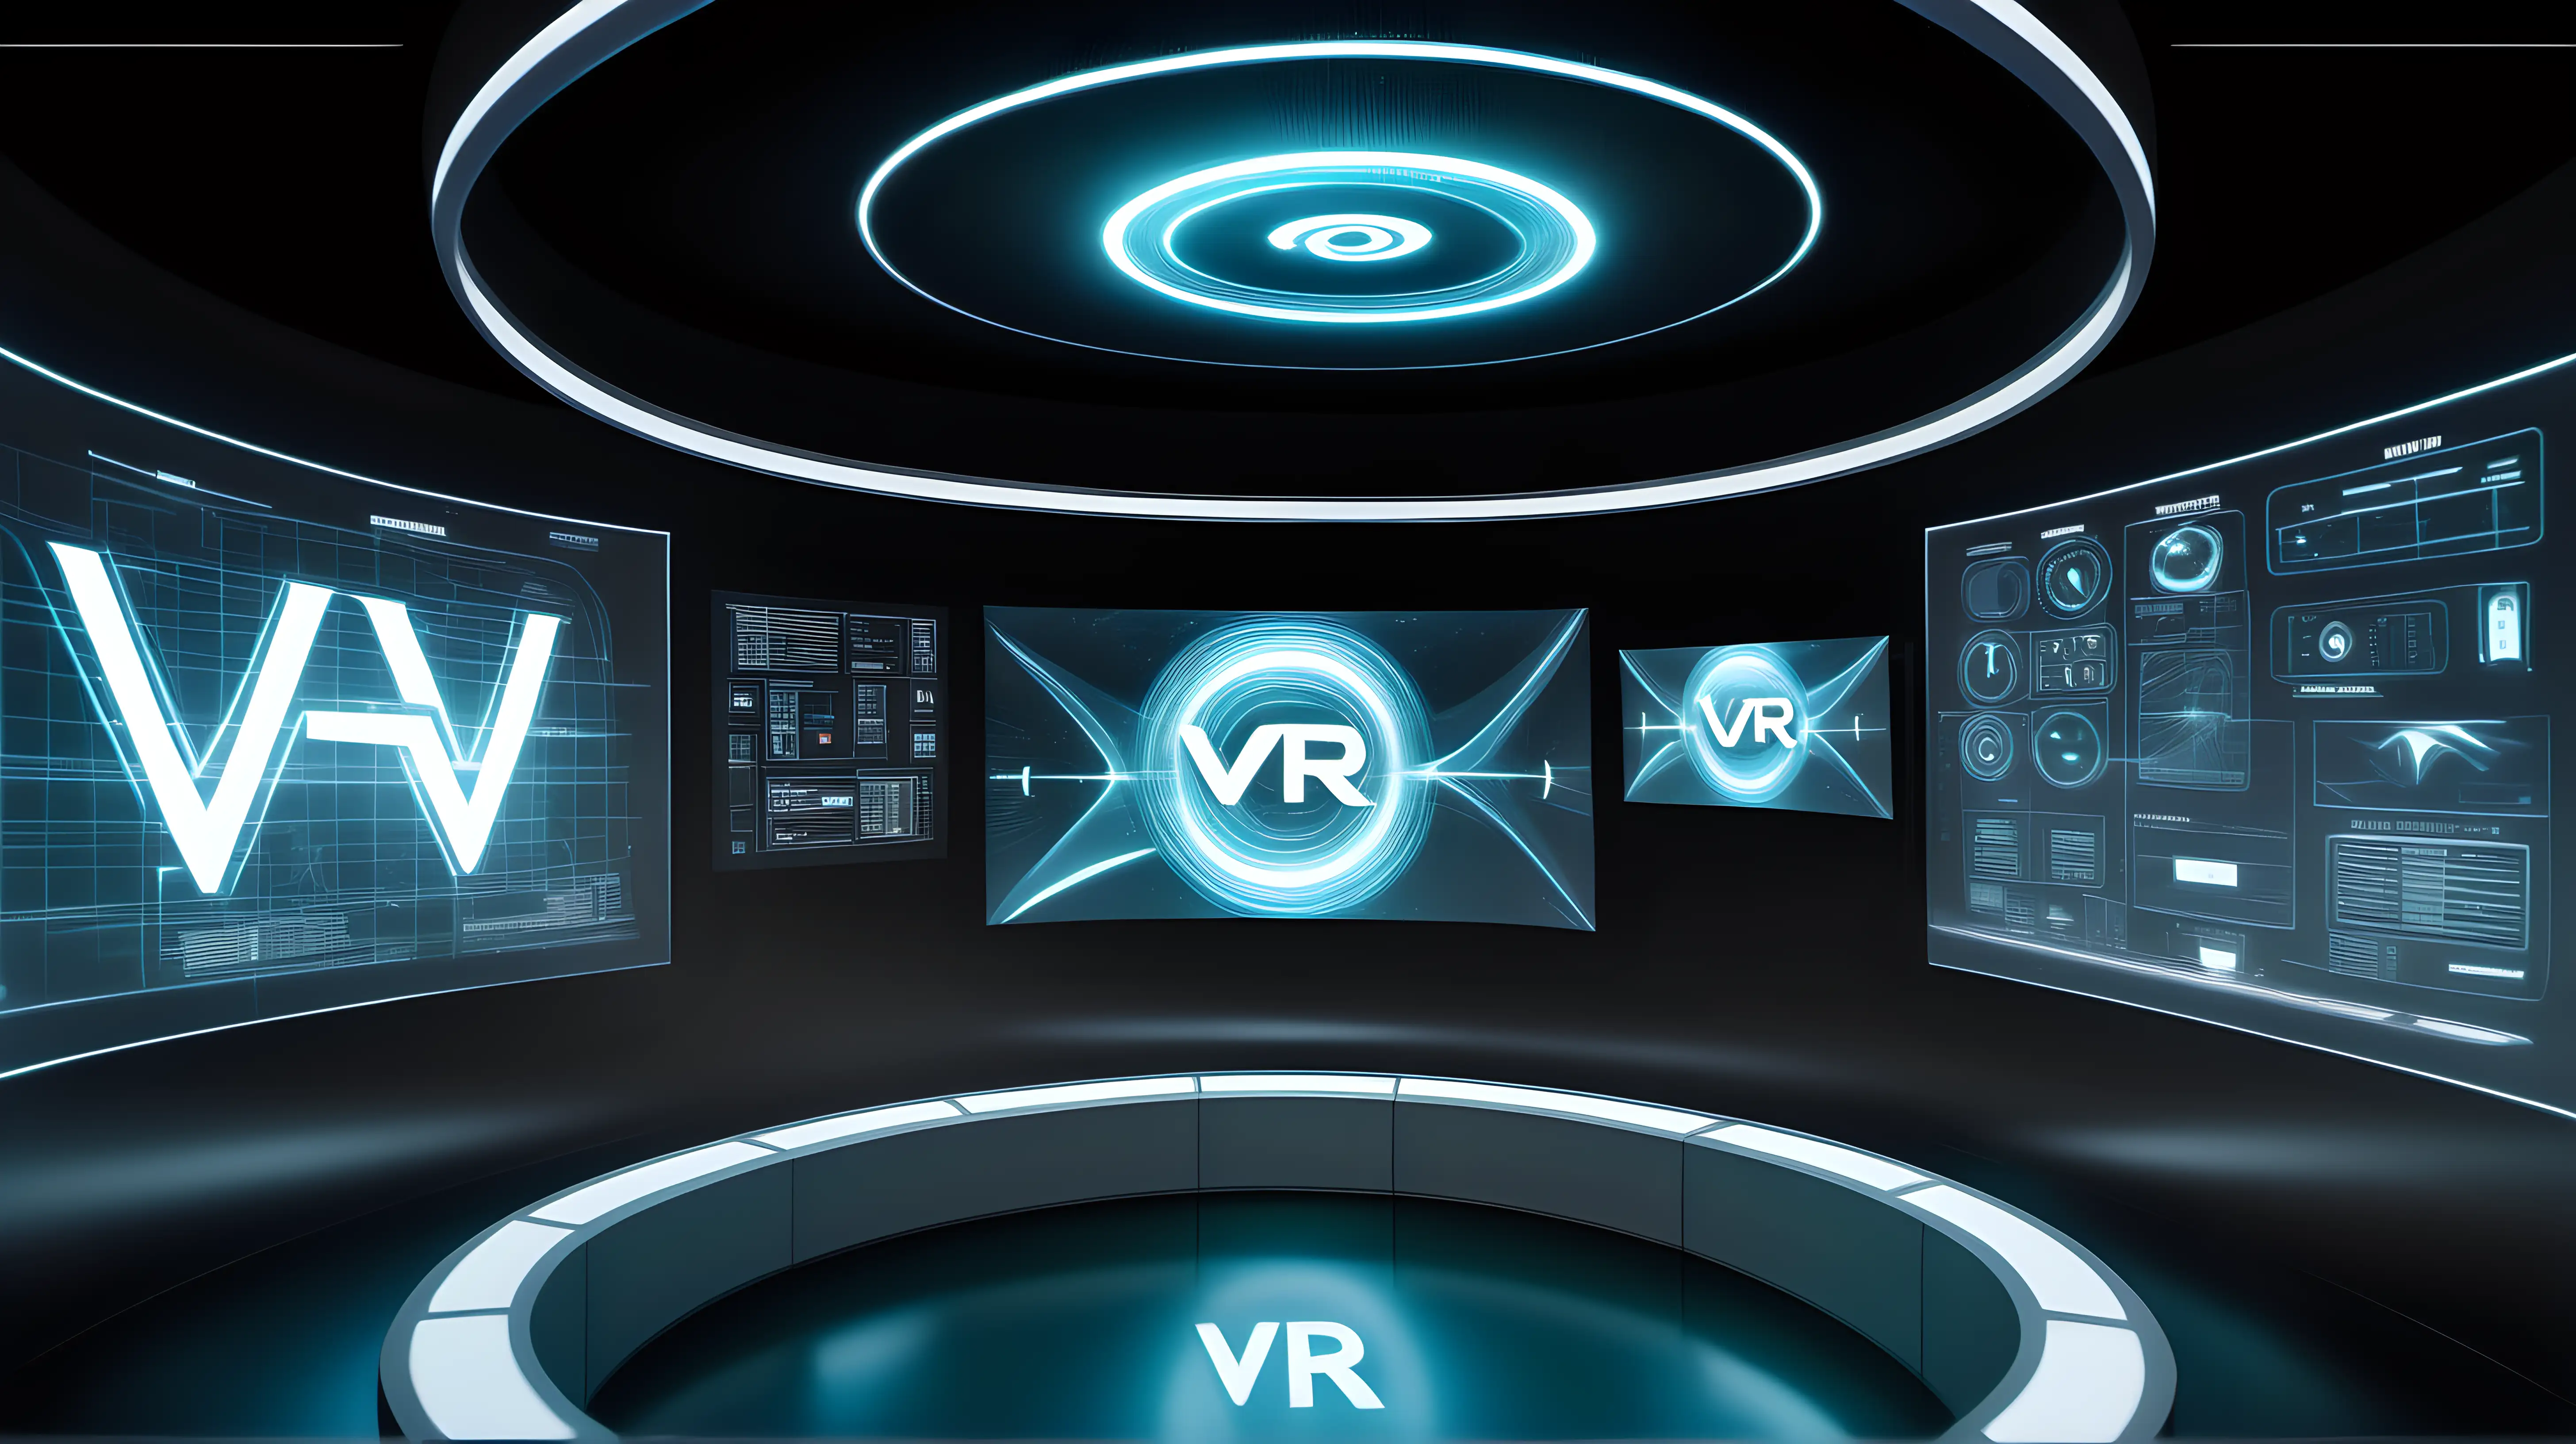 "VR" projected onto a transparent, holographic screen in the center of a sleek, minimalist control room, highlighting the futuristic interface of virtual reality systems.